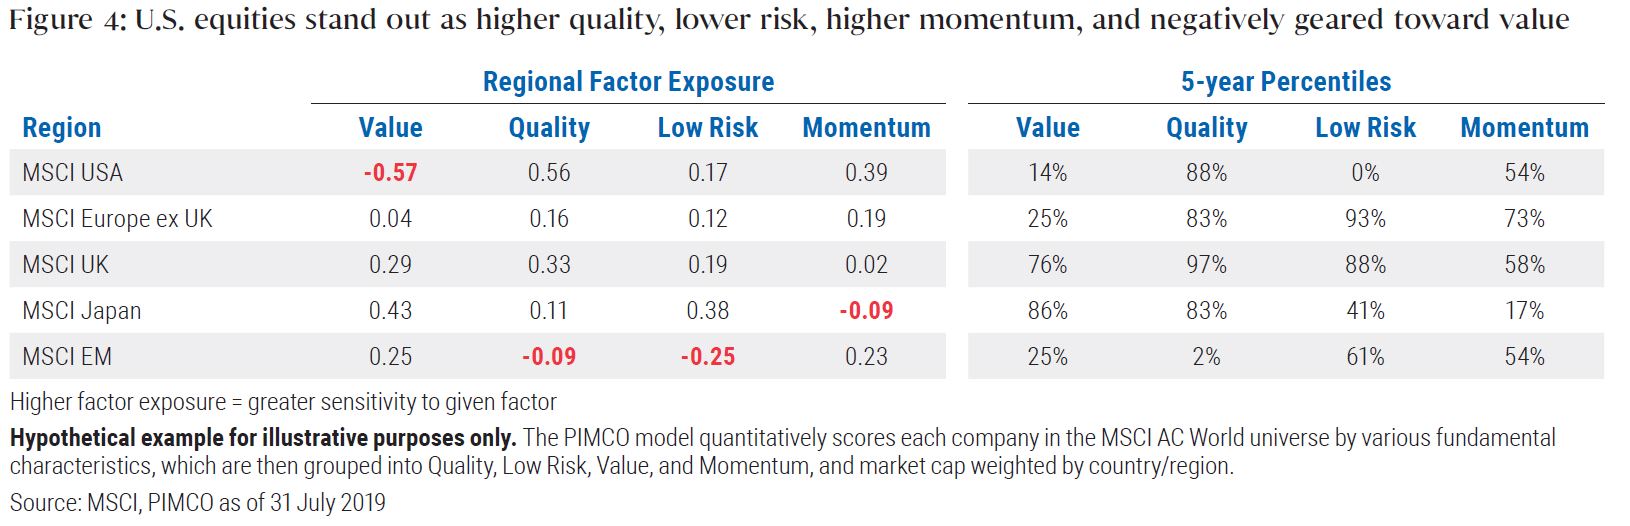 Figure 4 is a table showing the regional factor exposure and 5-year percentiles for value, quality, low risk and momentum. Data as of 31 July 2019 is detailed within.